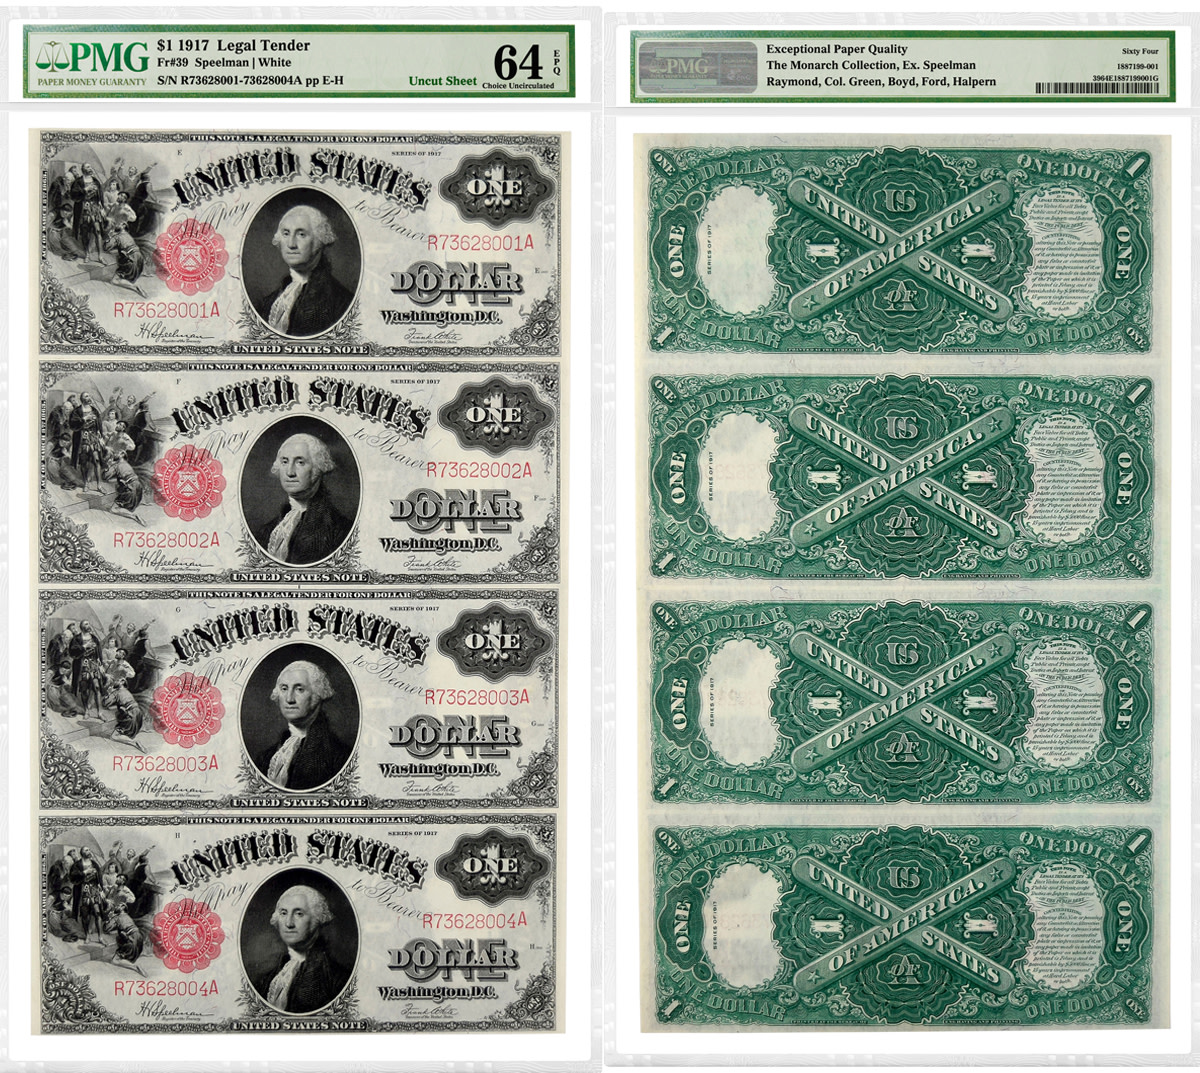 What are $1 bills in a sheet worth uncut & uncirculated? - APMEX